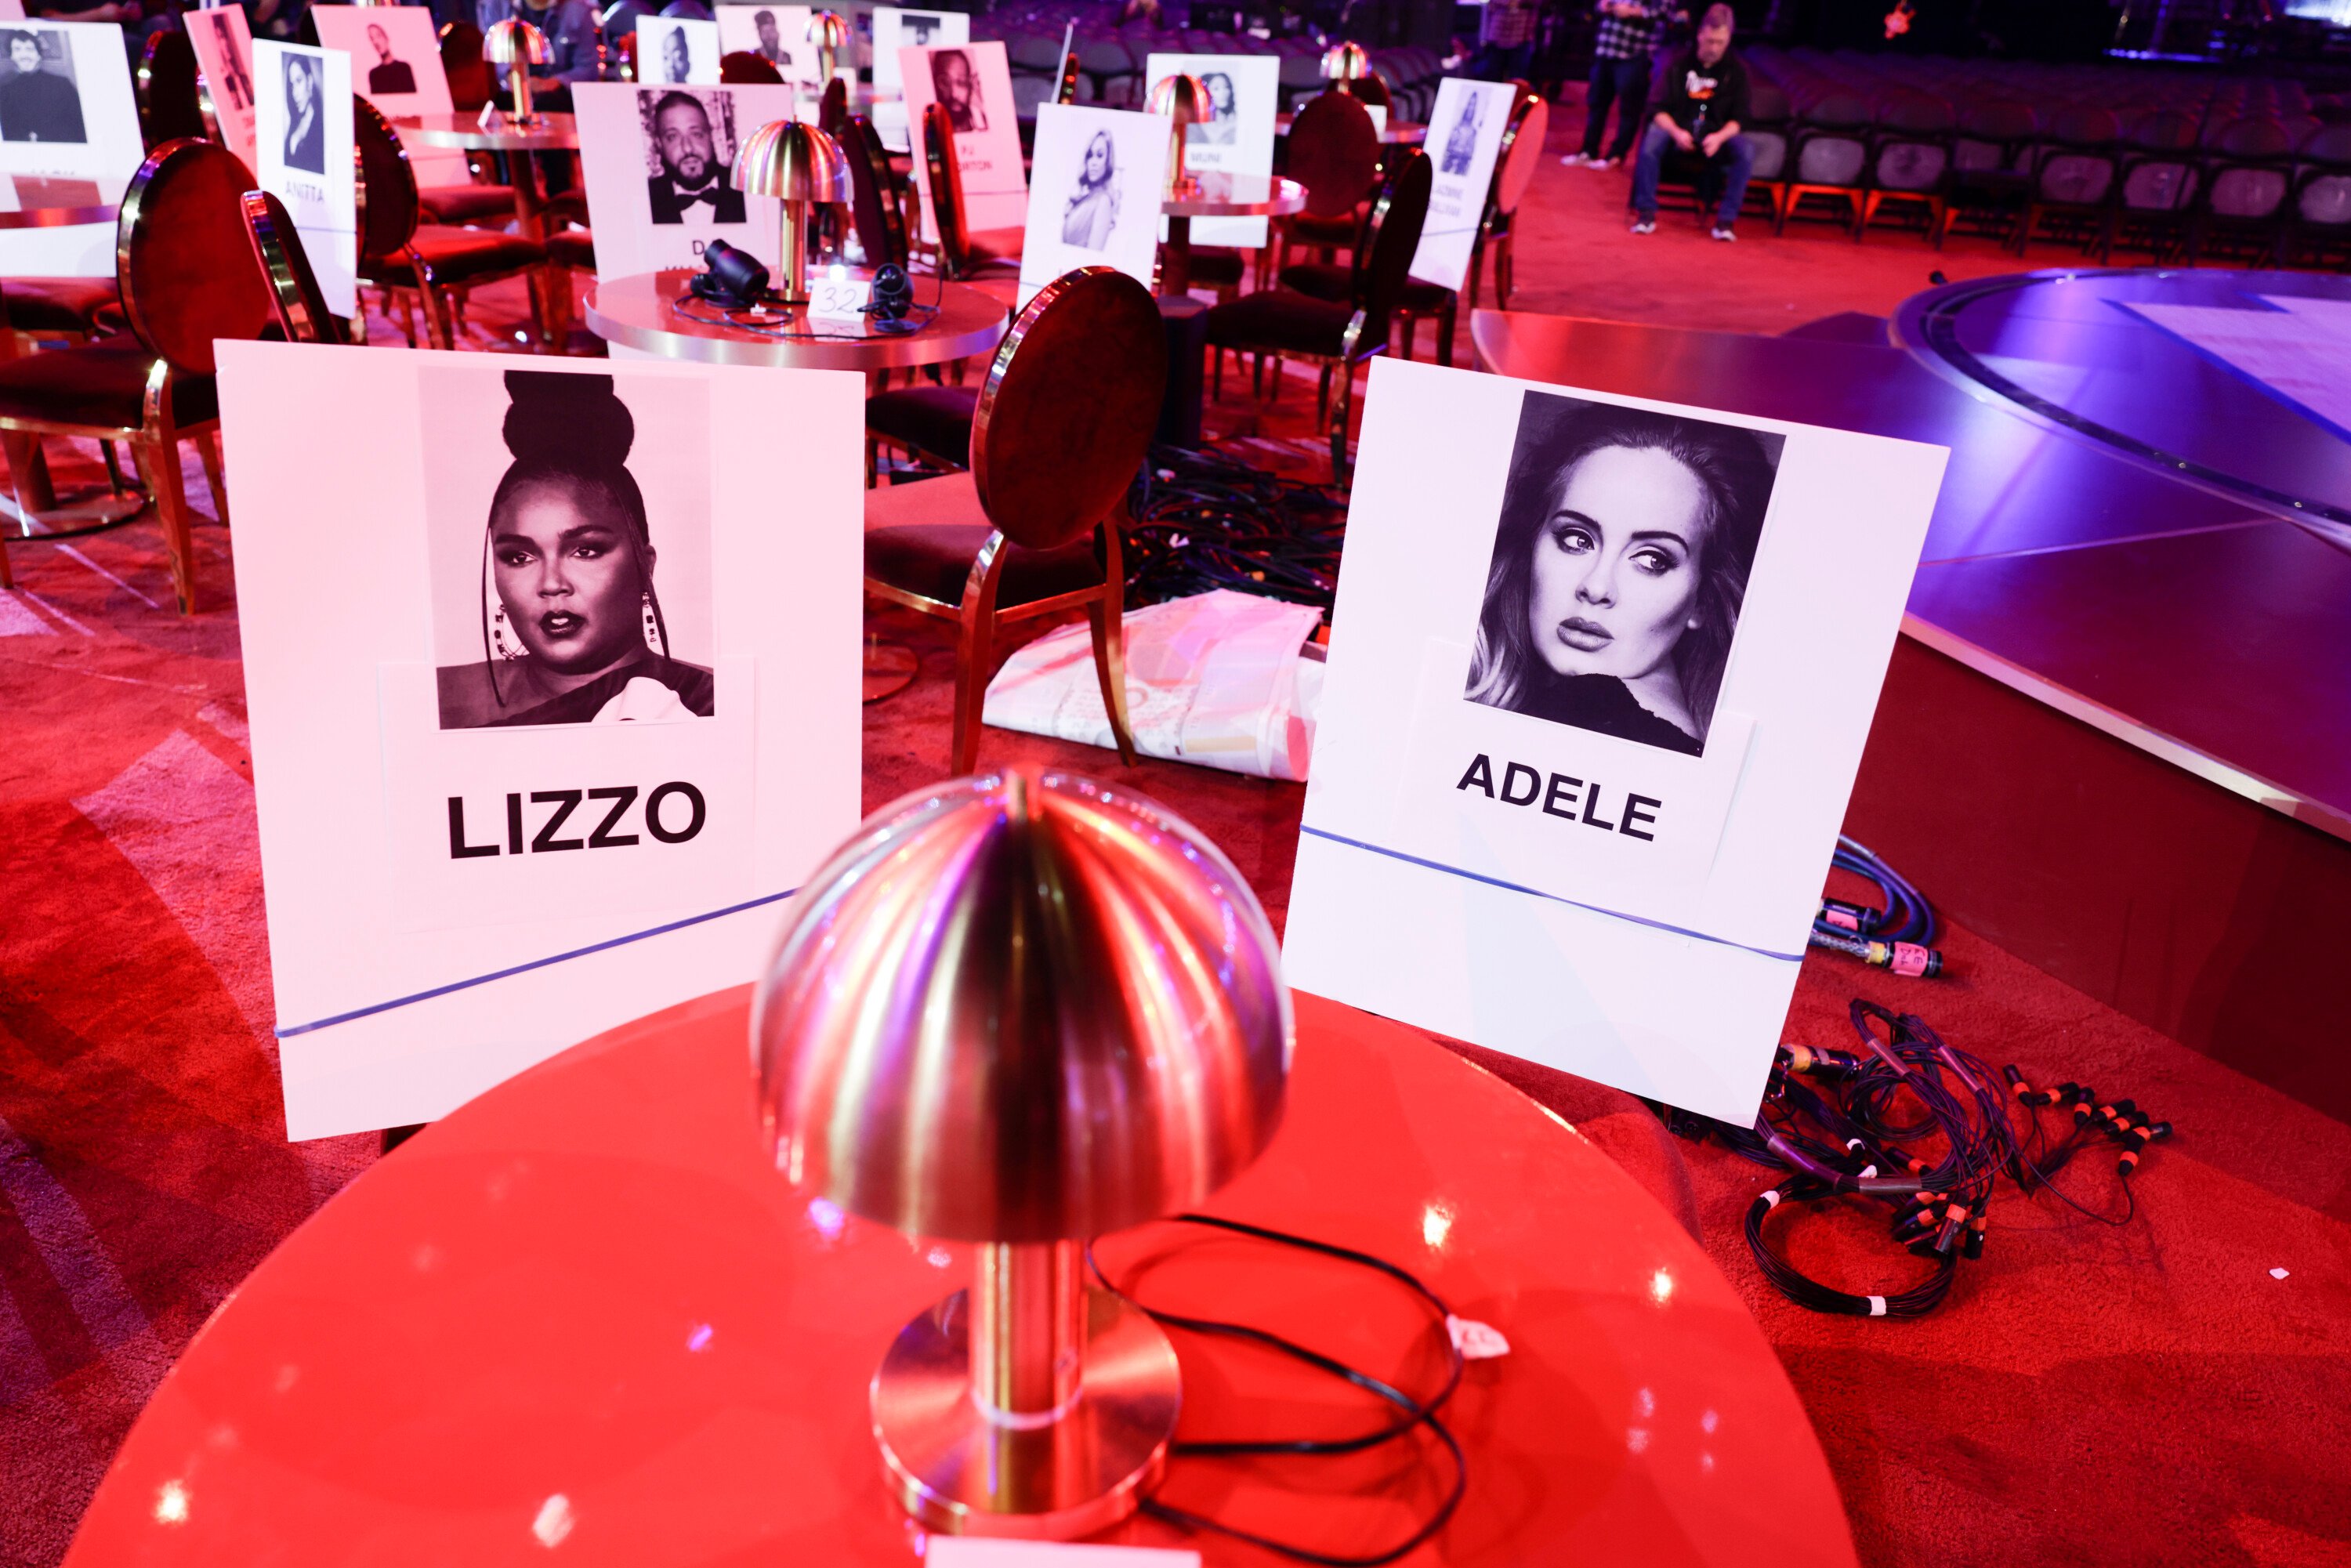 Lizzo and Adele supposed seats